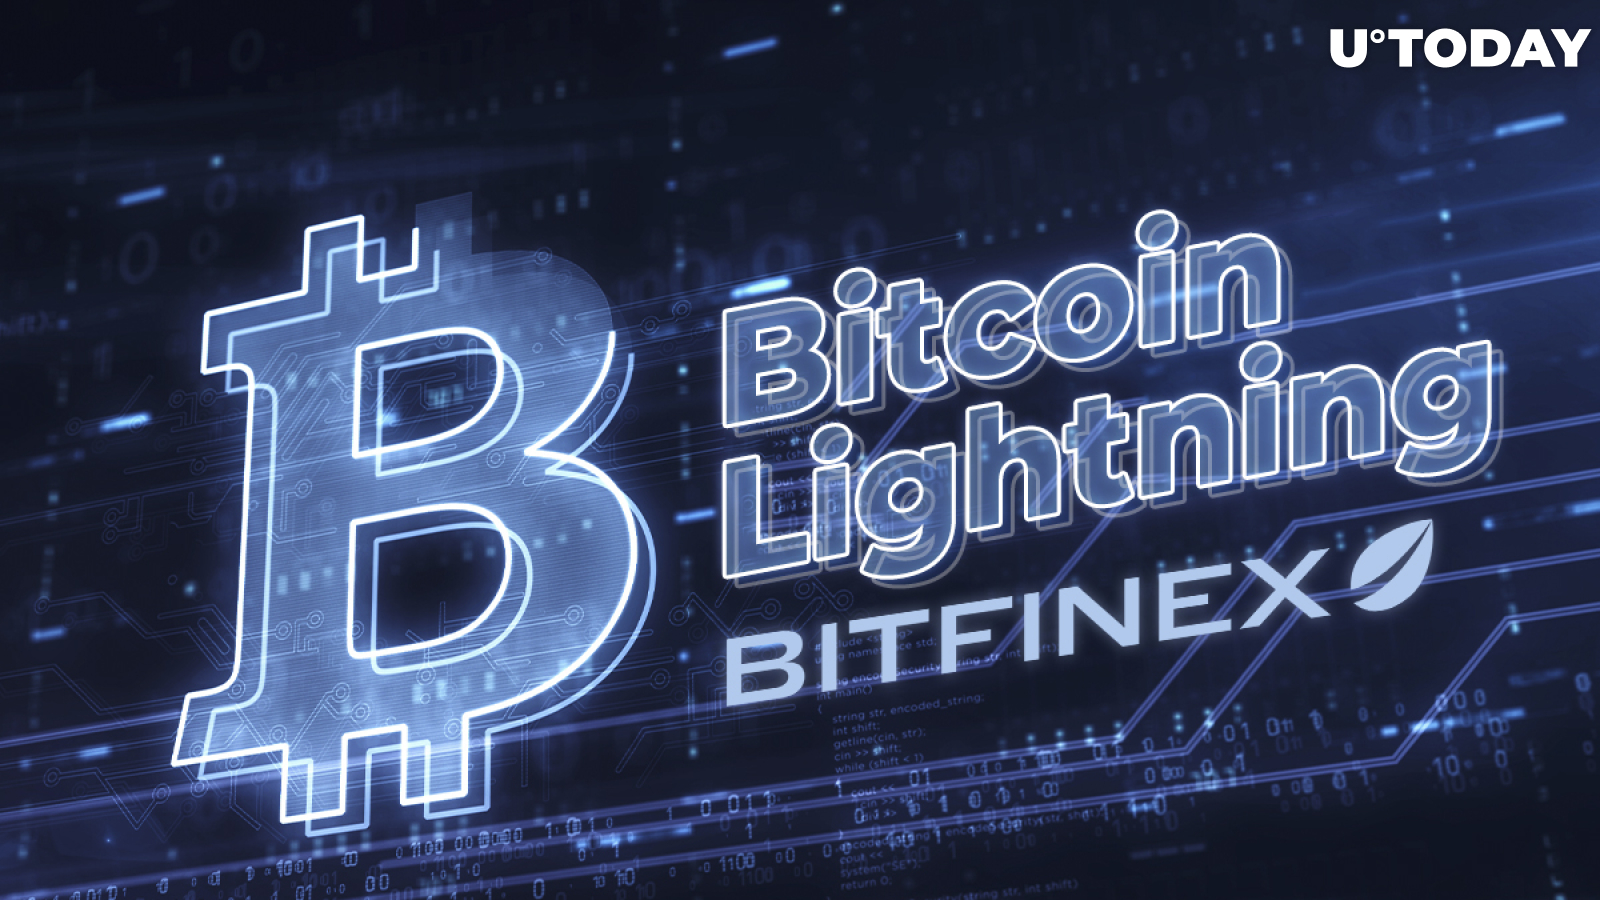 Bitcoin Lightning to Be Implemented by Major Crypto Exchange Bitfinex